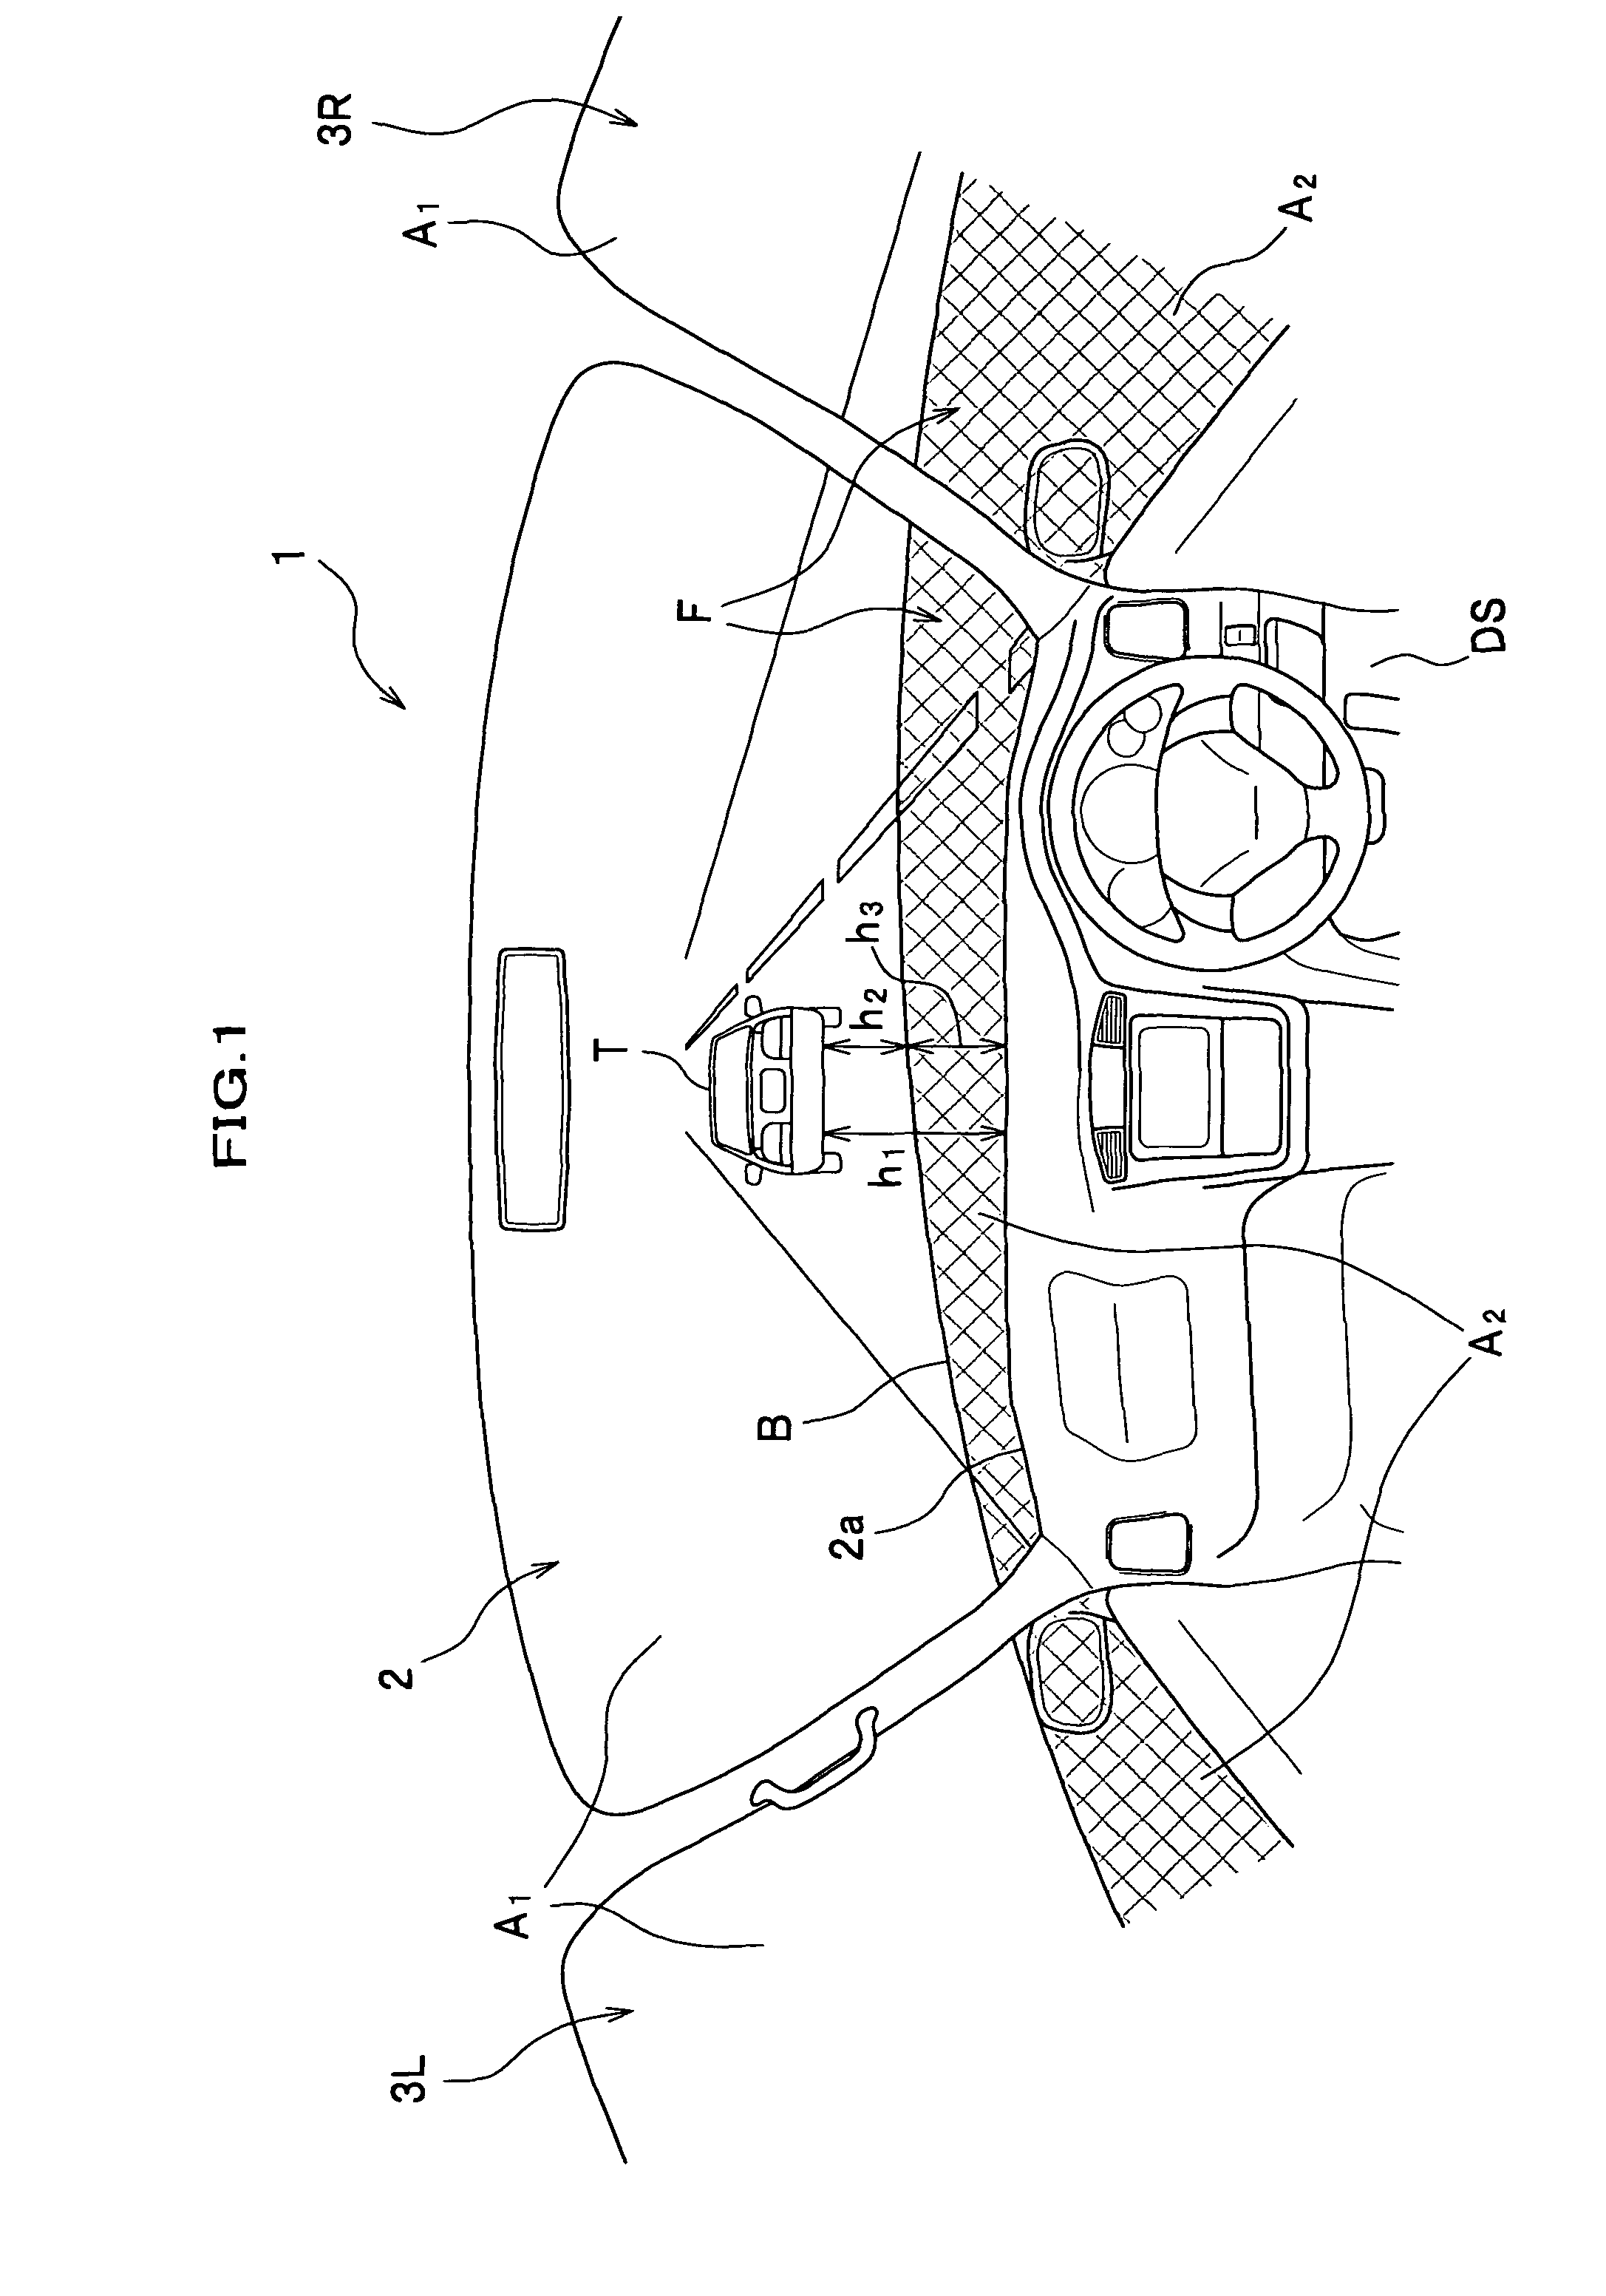 Vehicle for enhancing recognition accuracy of visual information